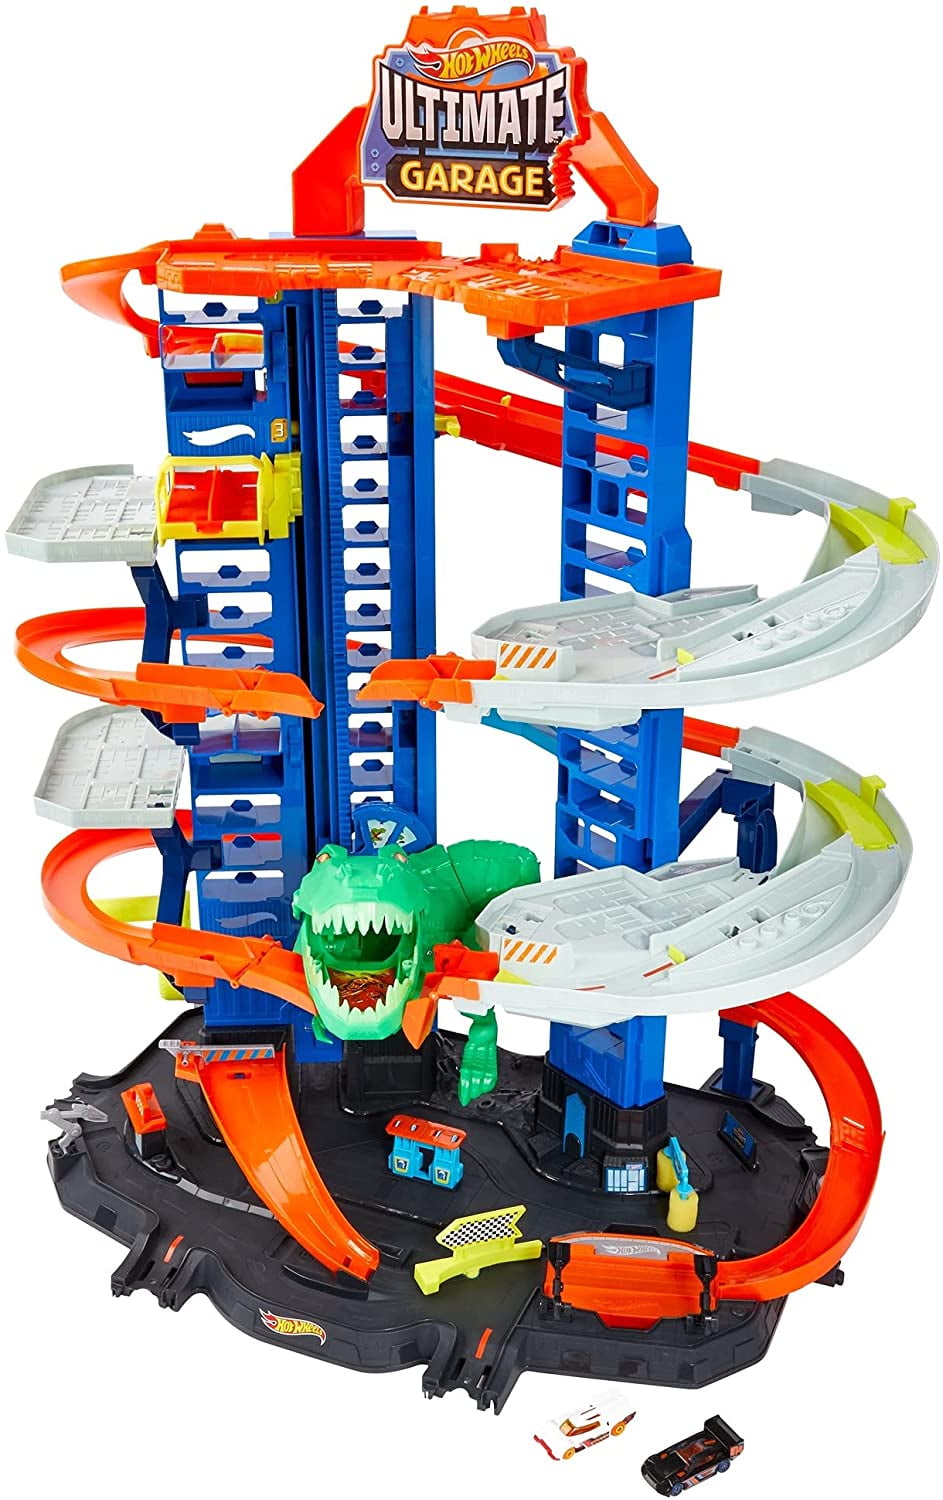 Hot Wheels City Ultimate Garage Playset with 2 Toy Cars & Robo-Dinosaur 